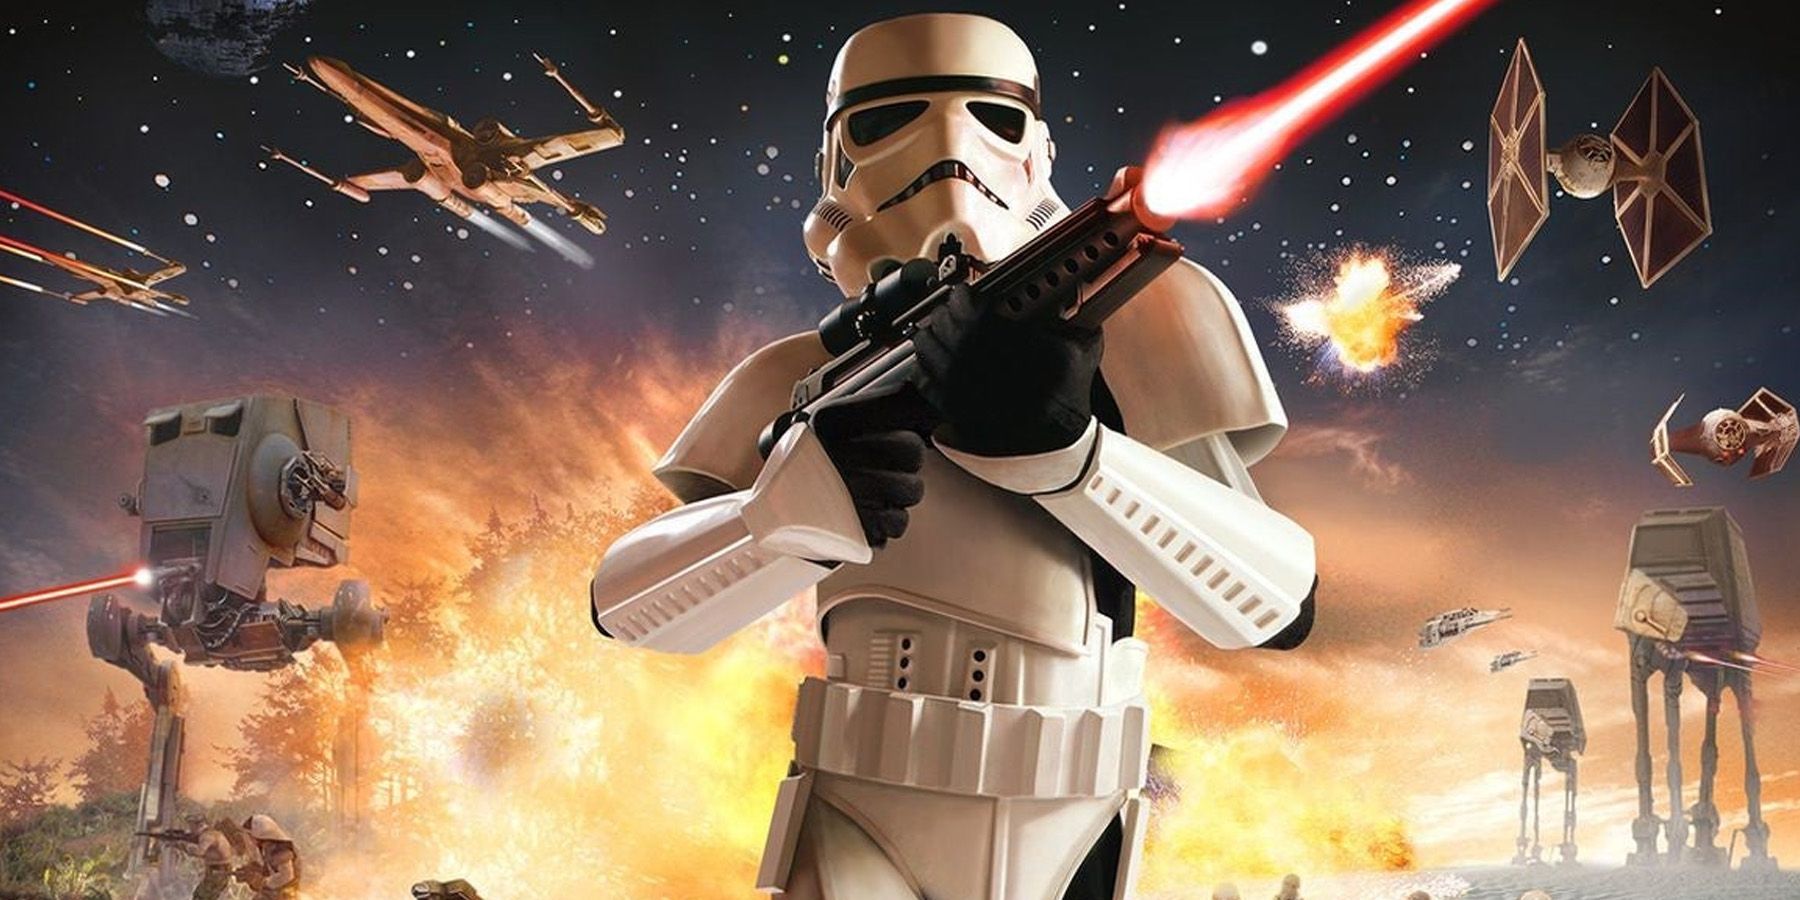 Star Wars Battlefront Classic Collection is Between a Rock and a Hard Place